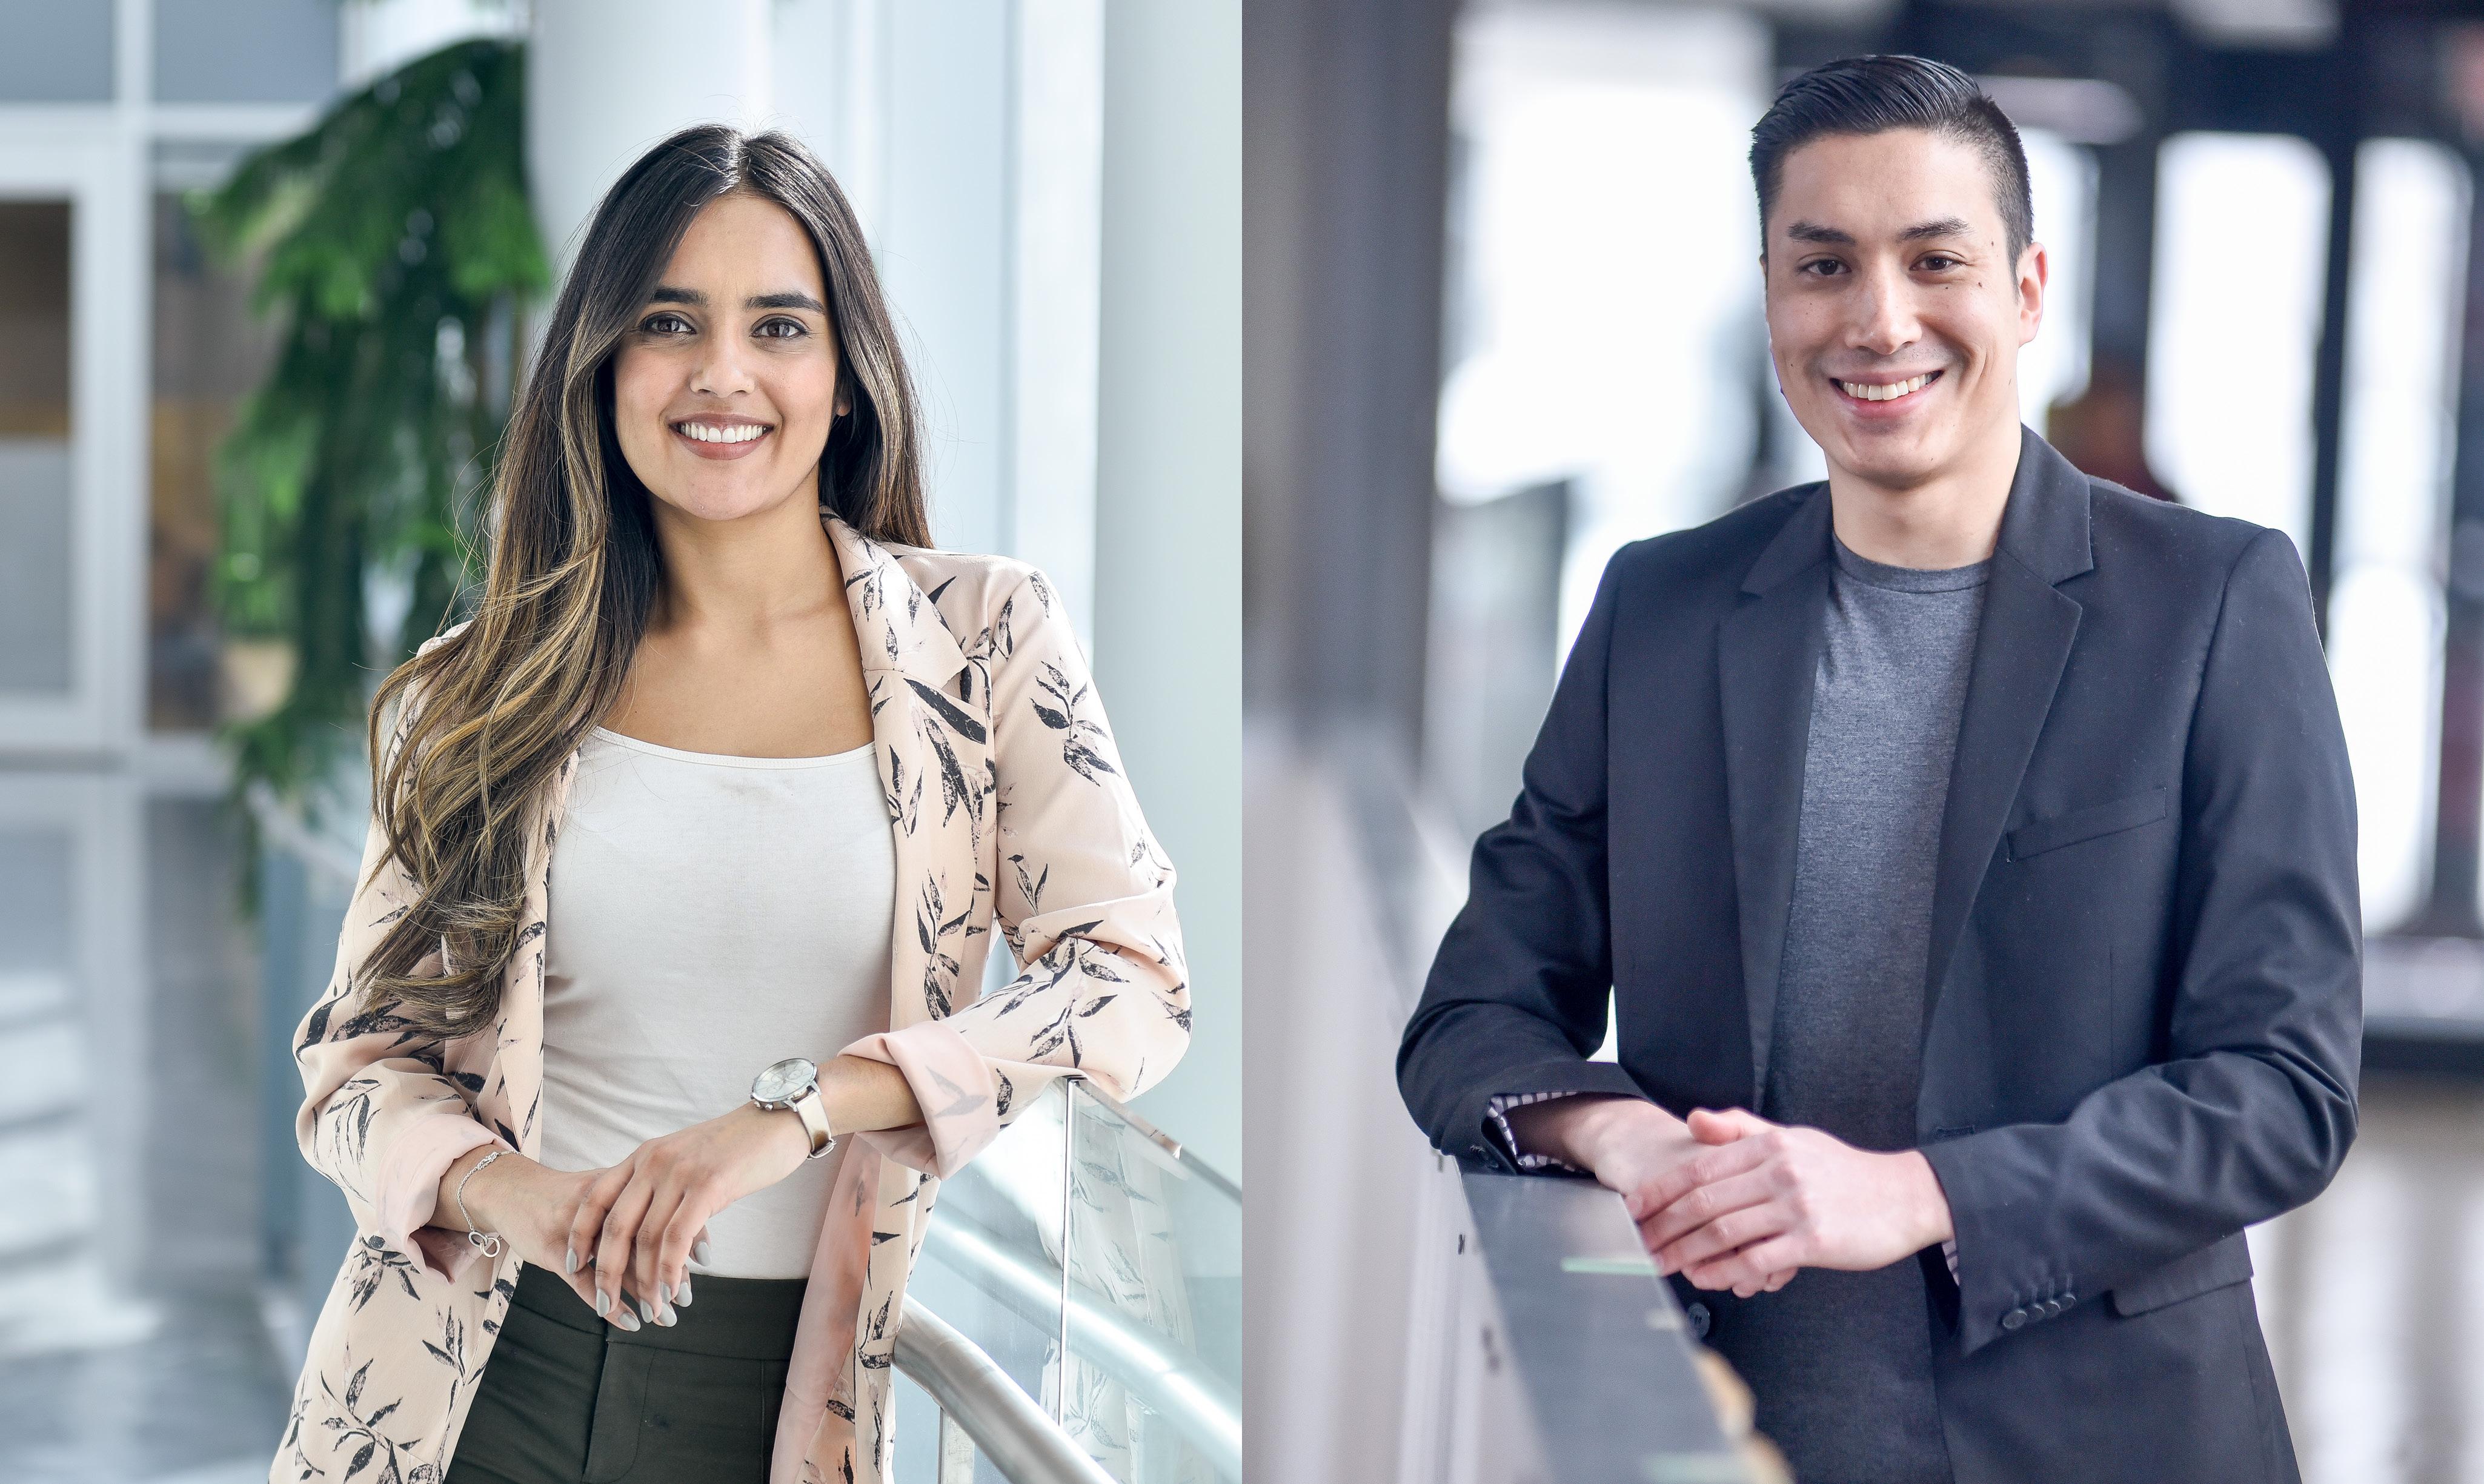 Sonya Dhillon (left), Matthew Quitasol (right) and Krysten Grimes are three PhD student in U of T Scarborough&#039;s innovative Clinical Psychology program.